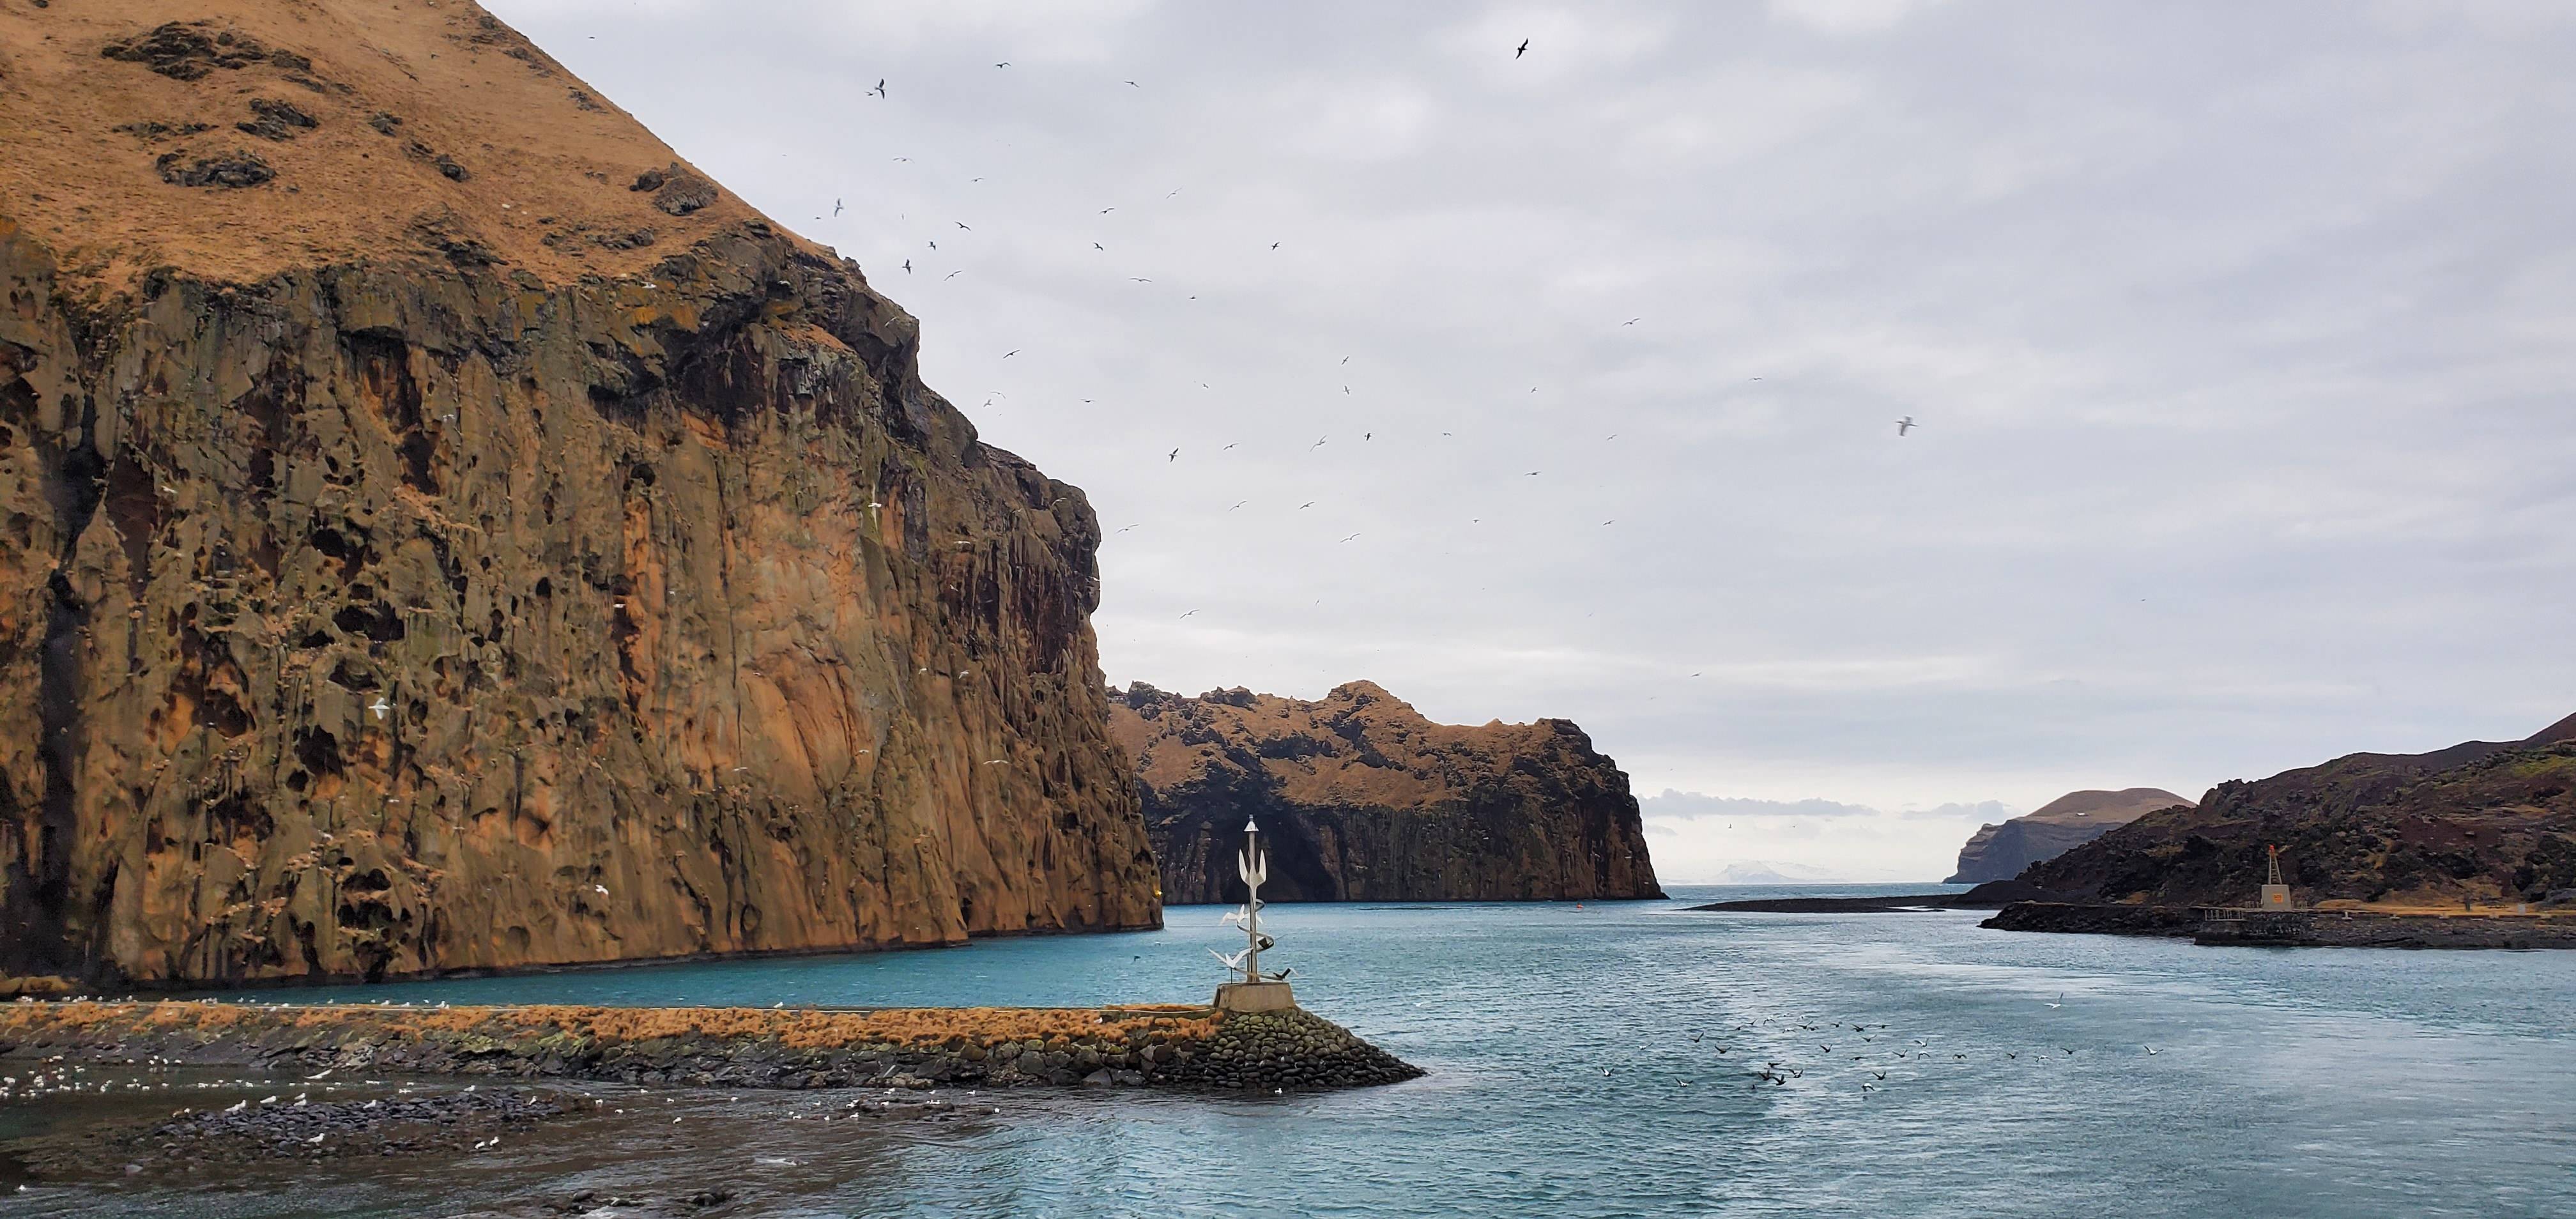 Icelandic seascape (photo submitted by Emma Dexter)